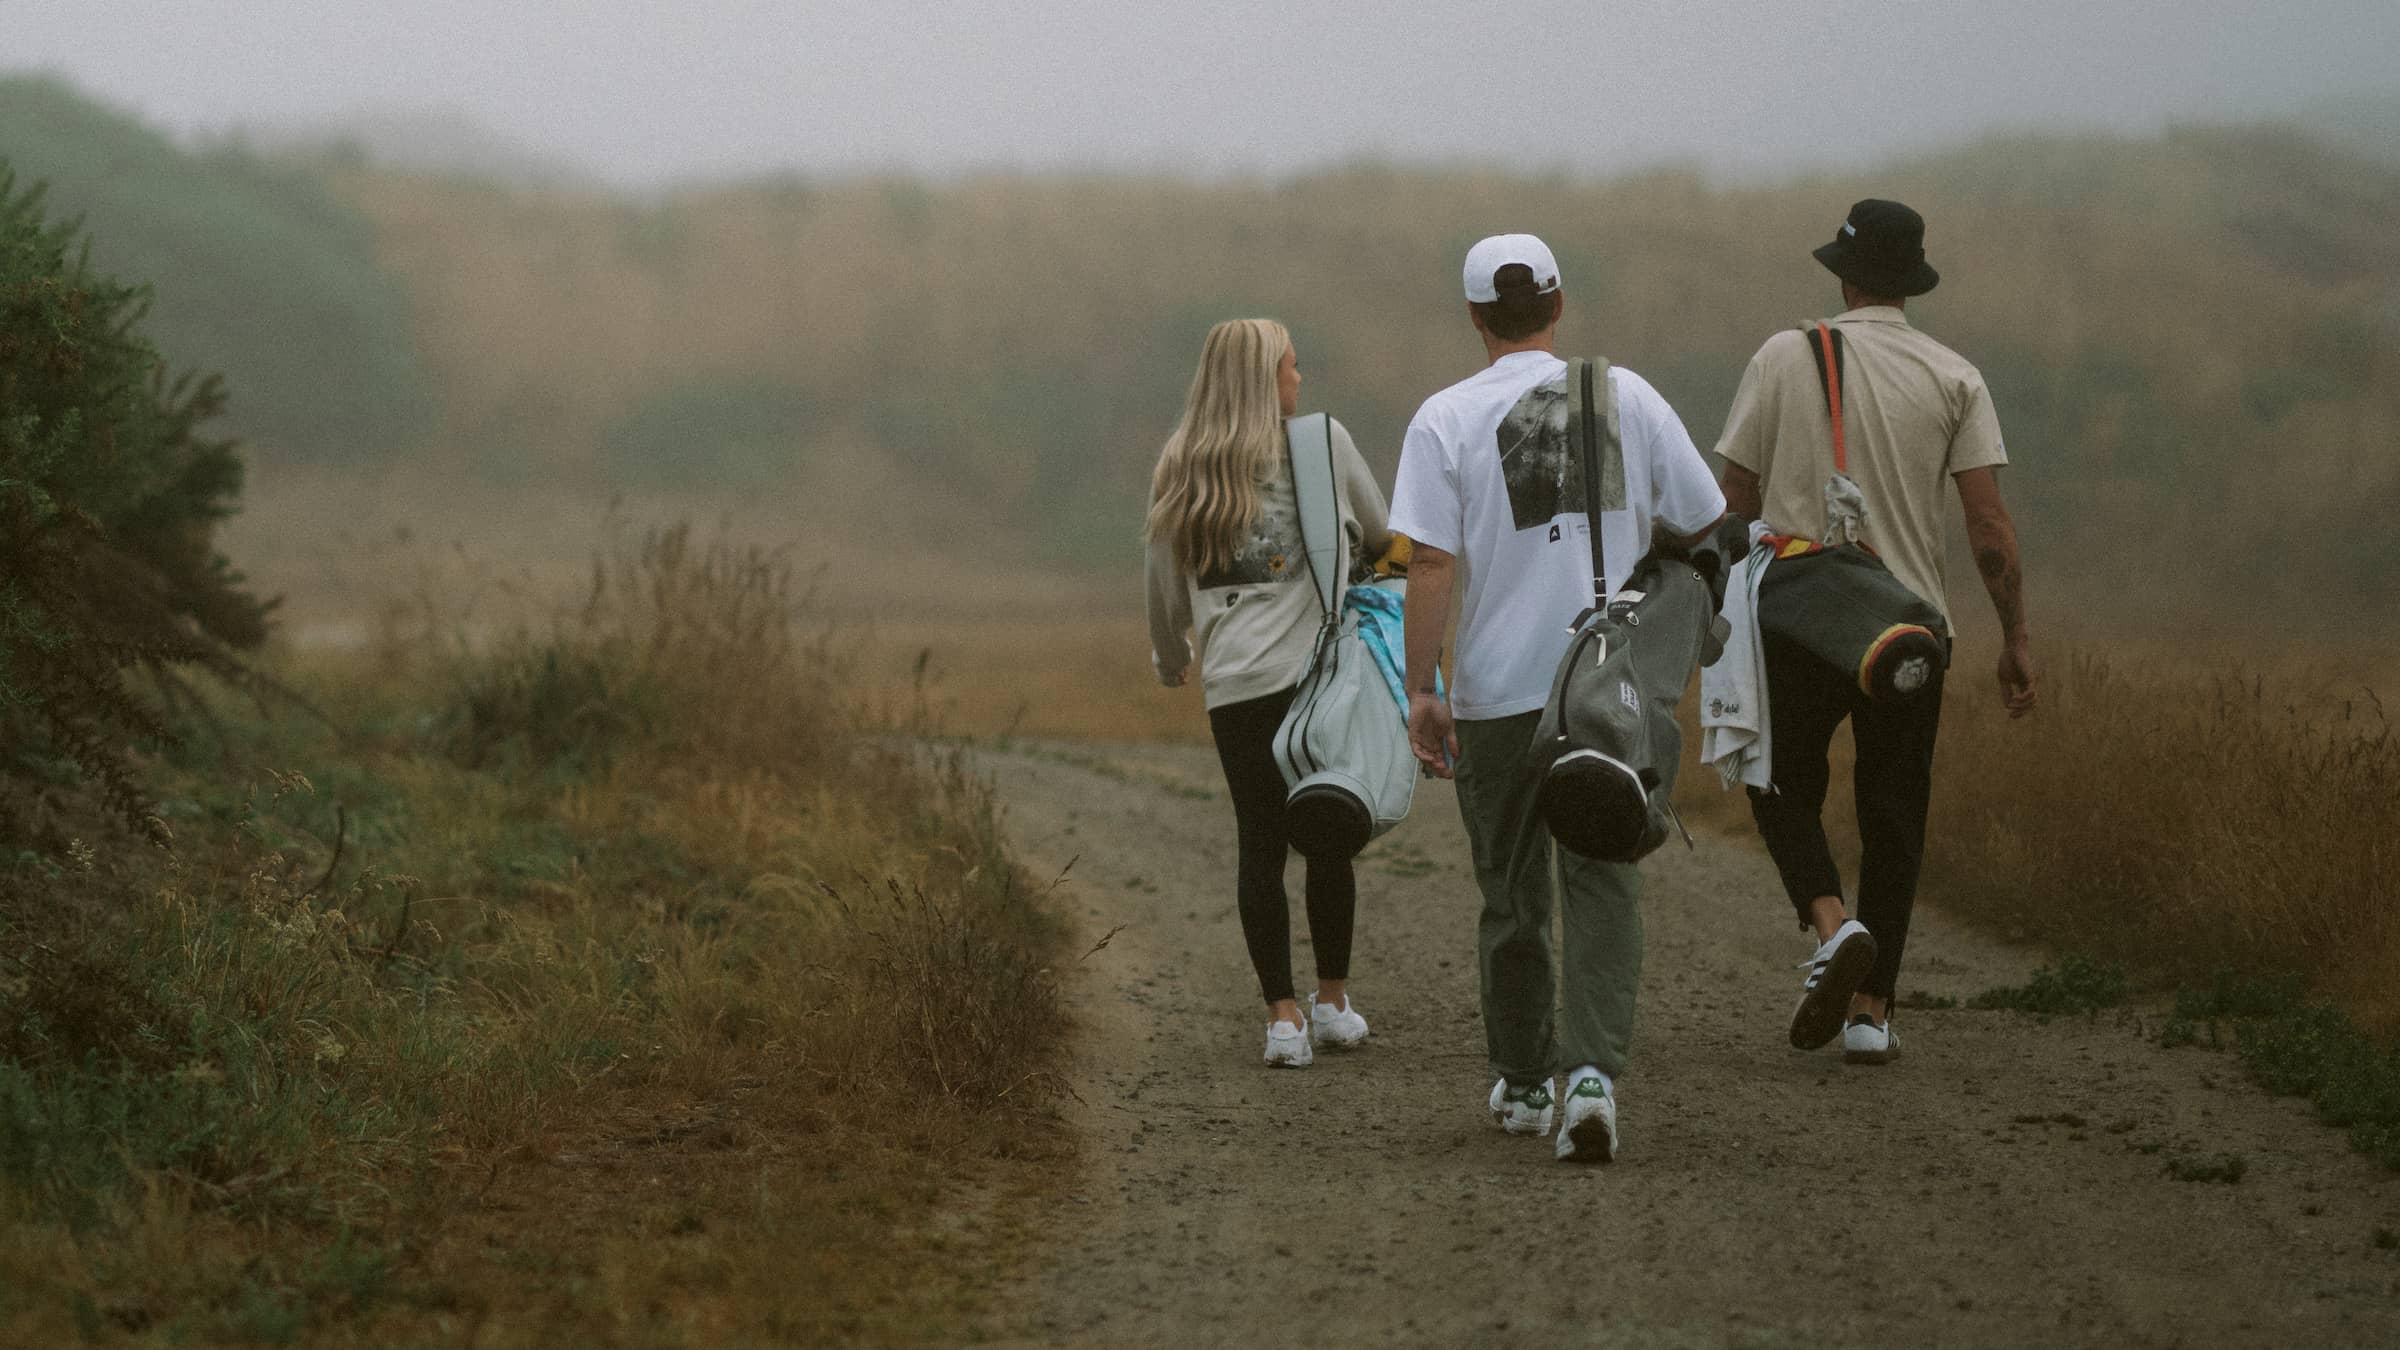 Adidas x burning cart society collection reminds golfers about the importance of nature in the sport